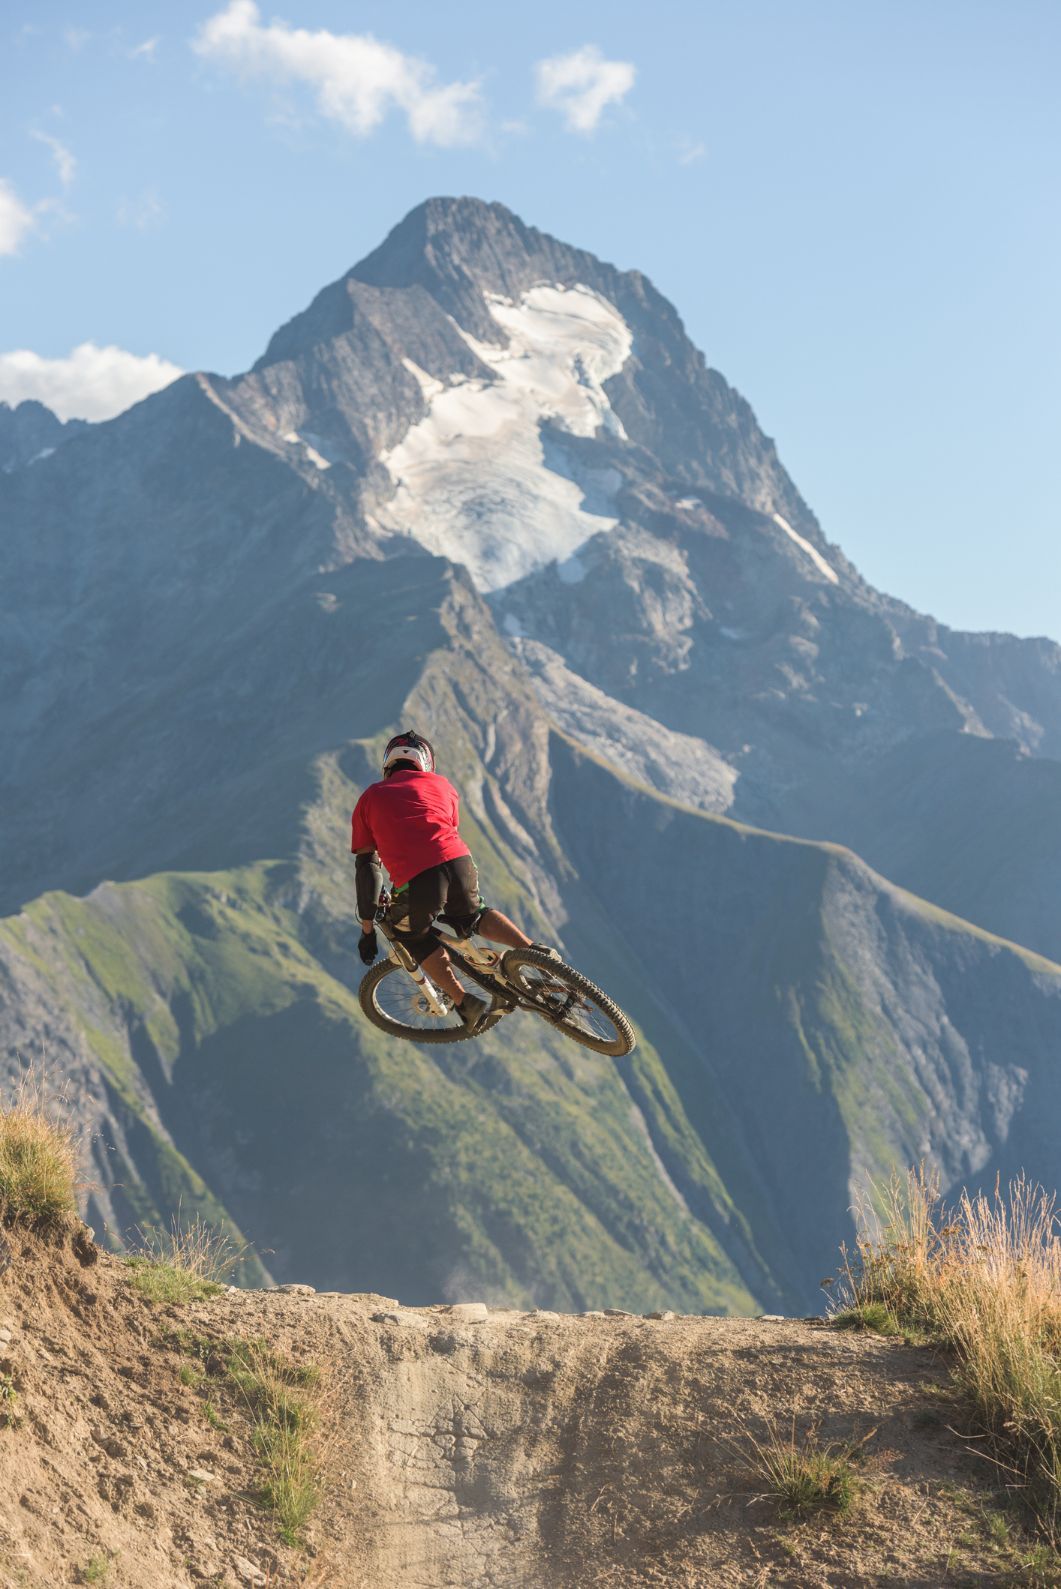 A mountain biker jumping in the air, with Alpe d'Huez and Les Deux Alpes in the background.